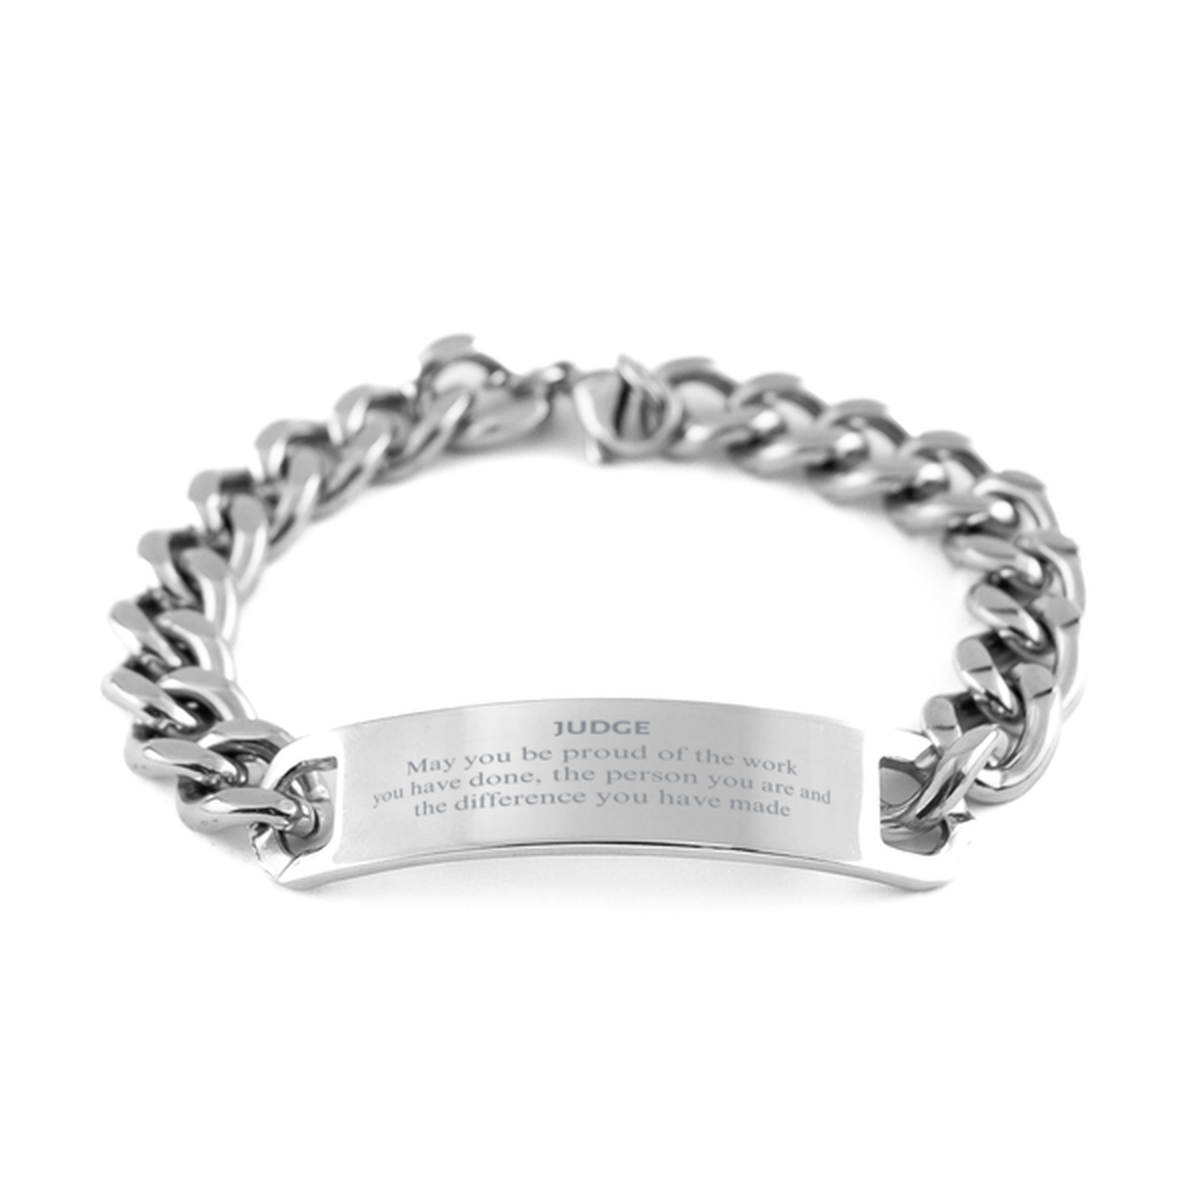 Judge May you be proud of the work you have done, Retirement Judge Cuban Chain Stainless Steel Bracelet for Colleague Appreciation Gifts Amazing for Judge